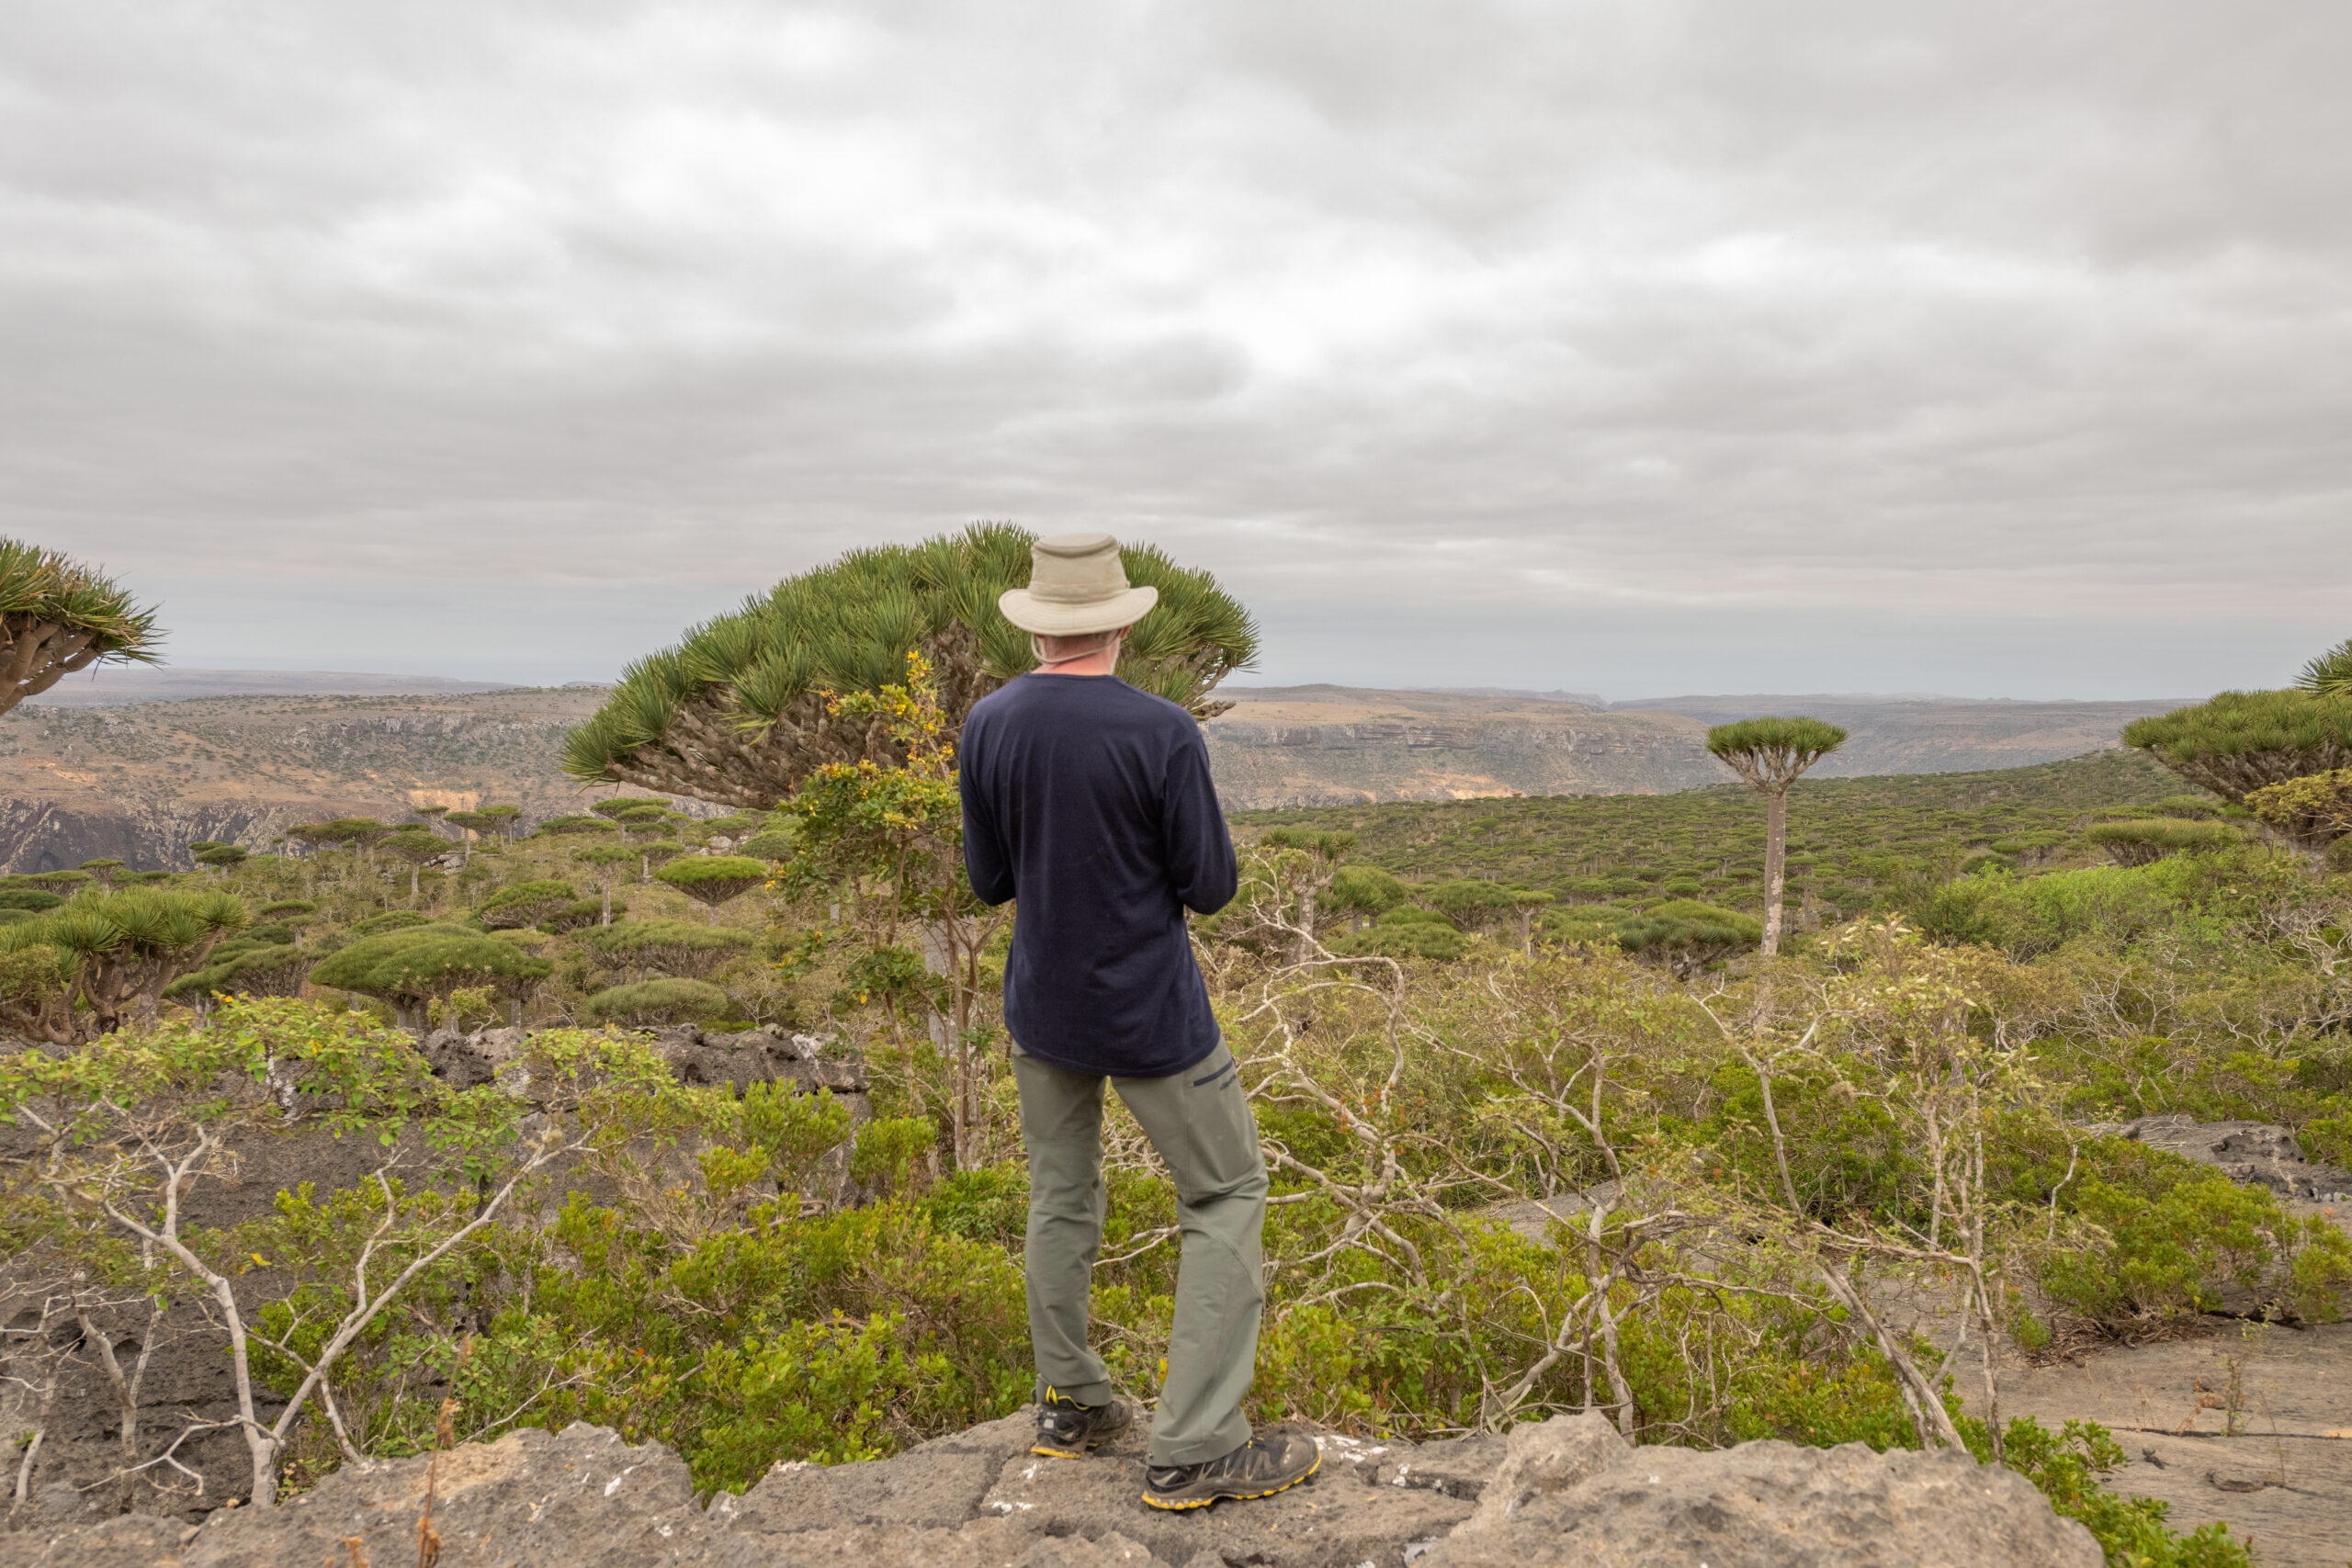 Morten Ross and Firhmin Forest, Socotra